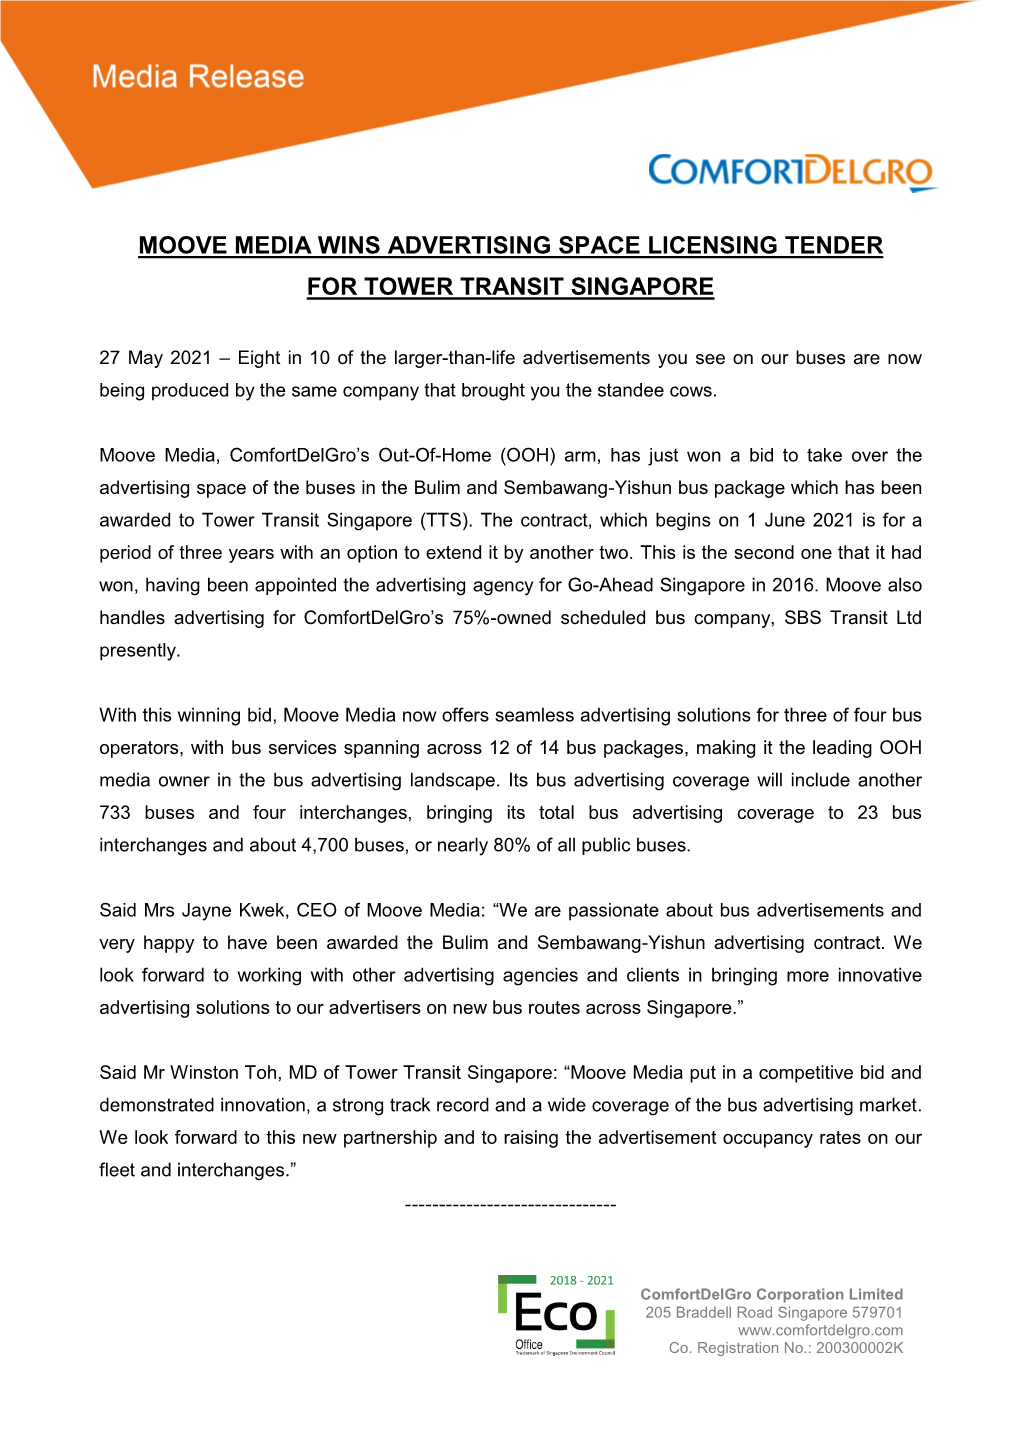 Moove Media Wins Advertising Space Licensing Tender for Tower Transit Singapore